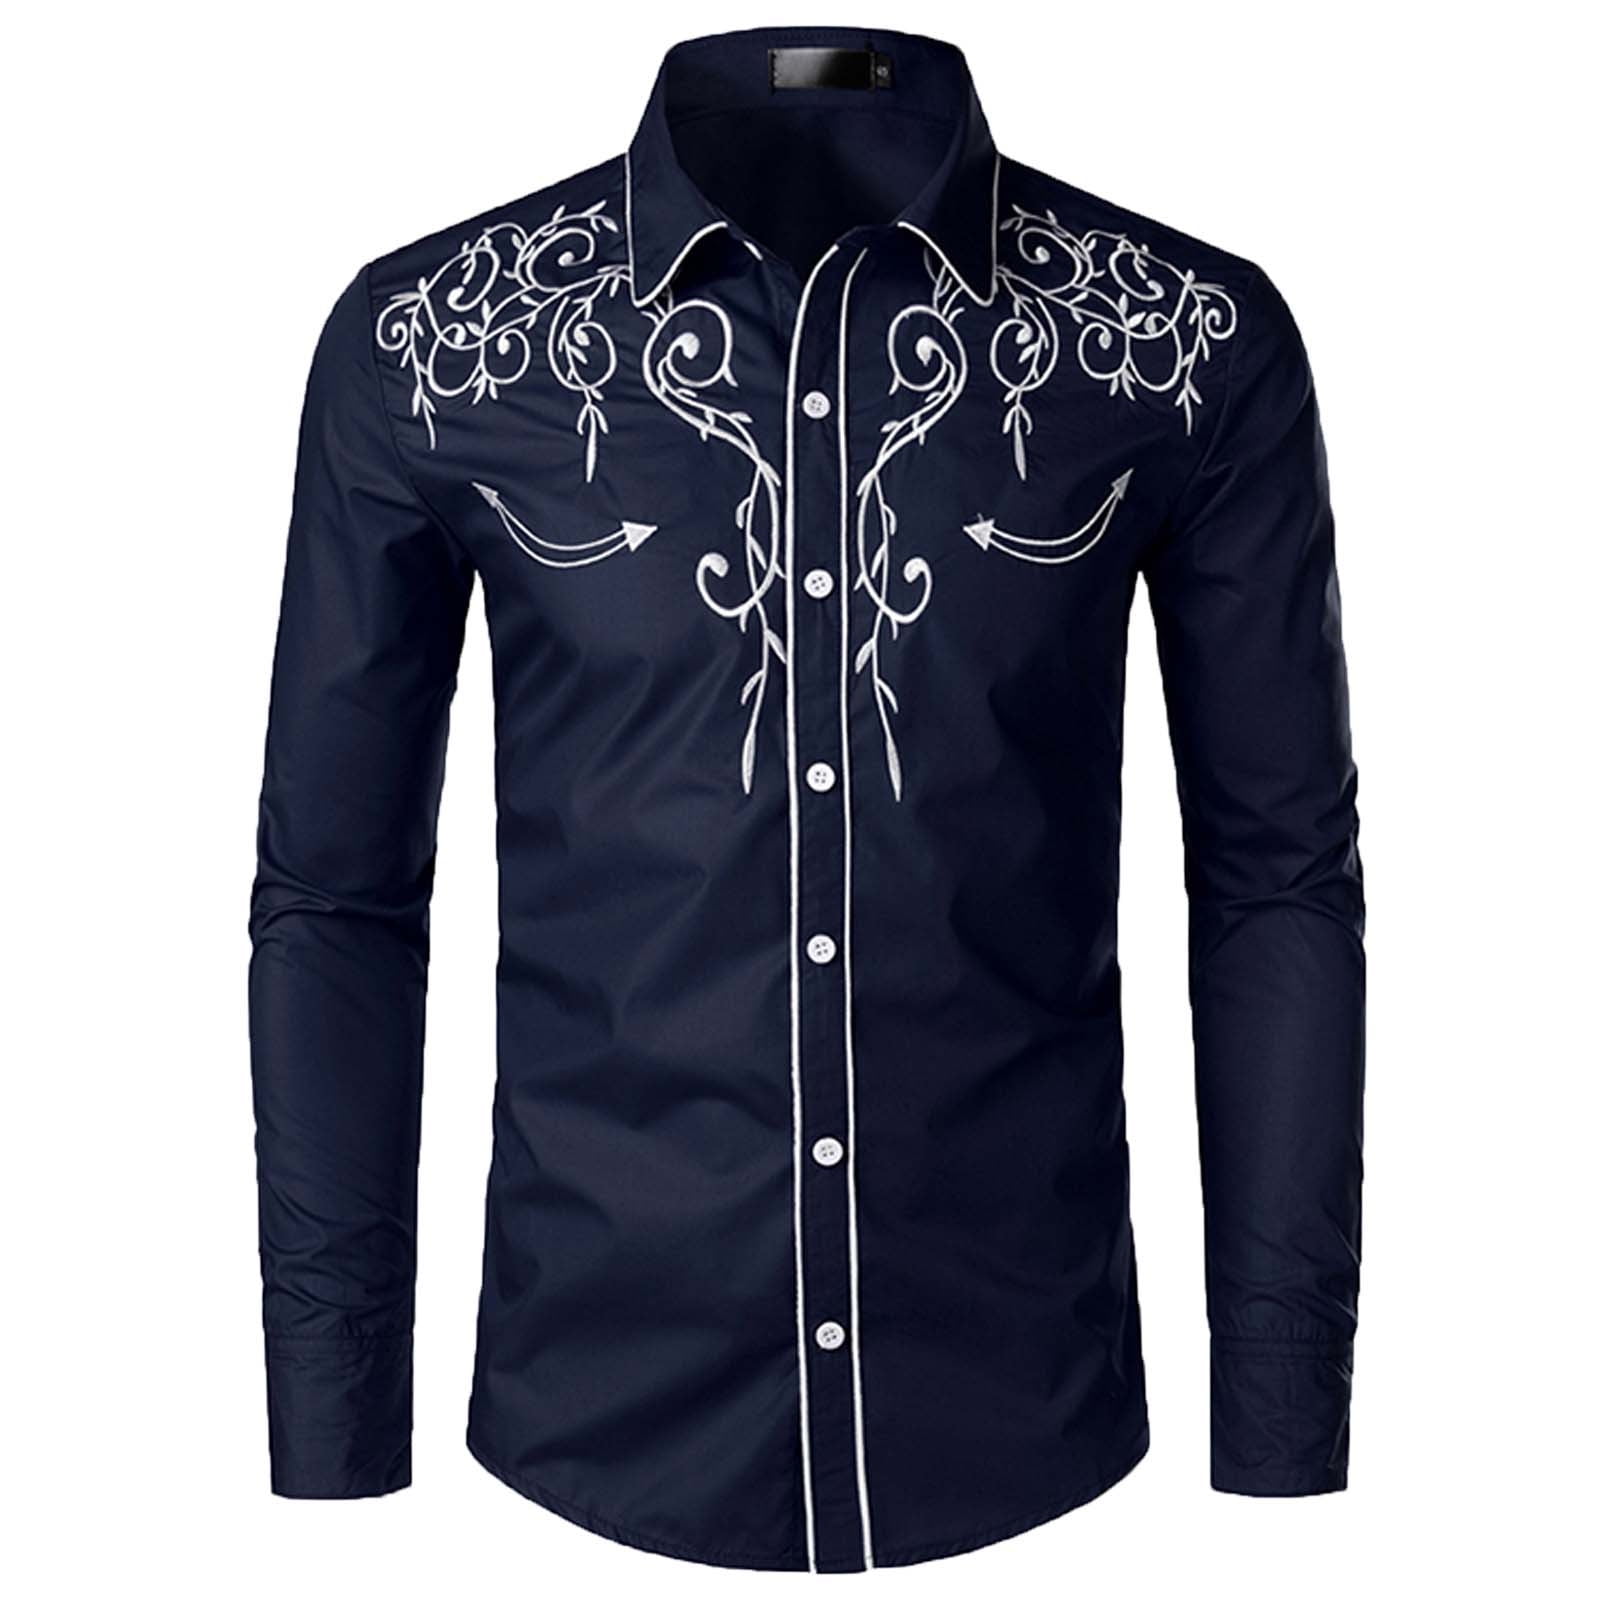 Men's Western Cowboy Shirts Long Sleeve Slim Fit Floral Embroideres ...